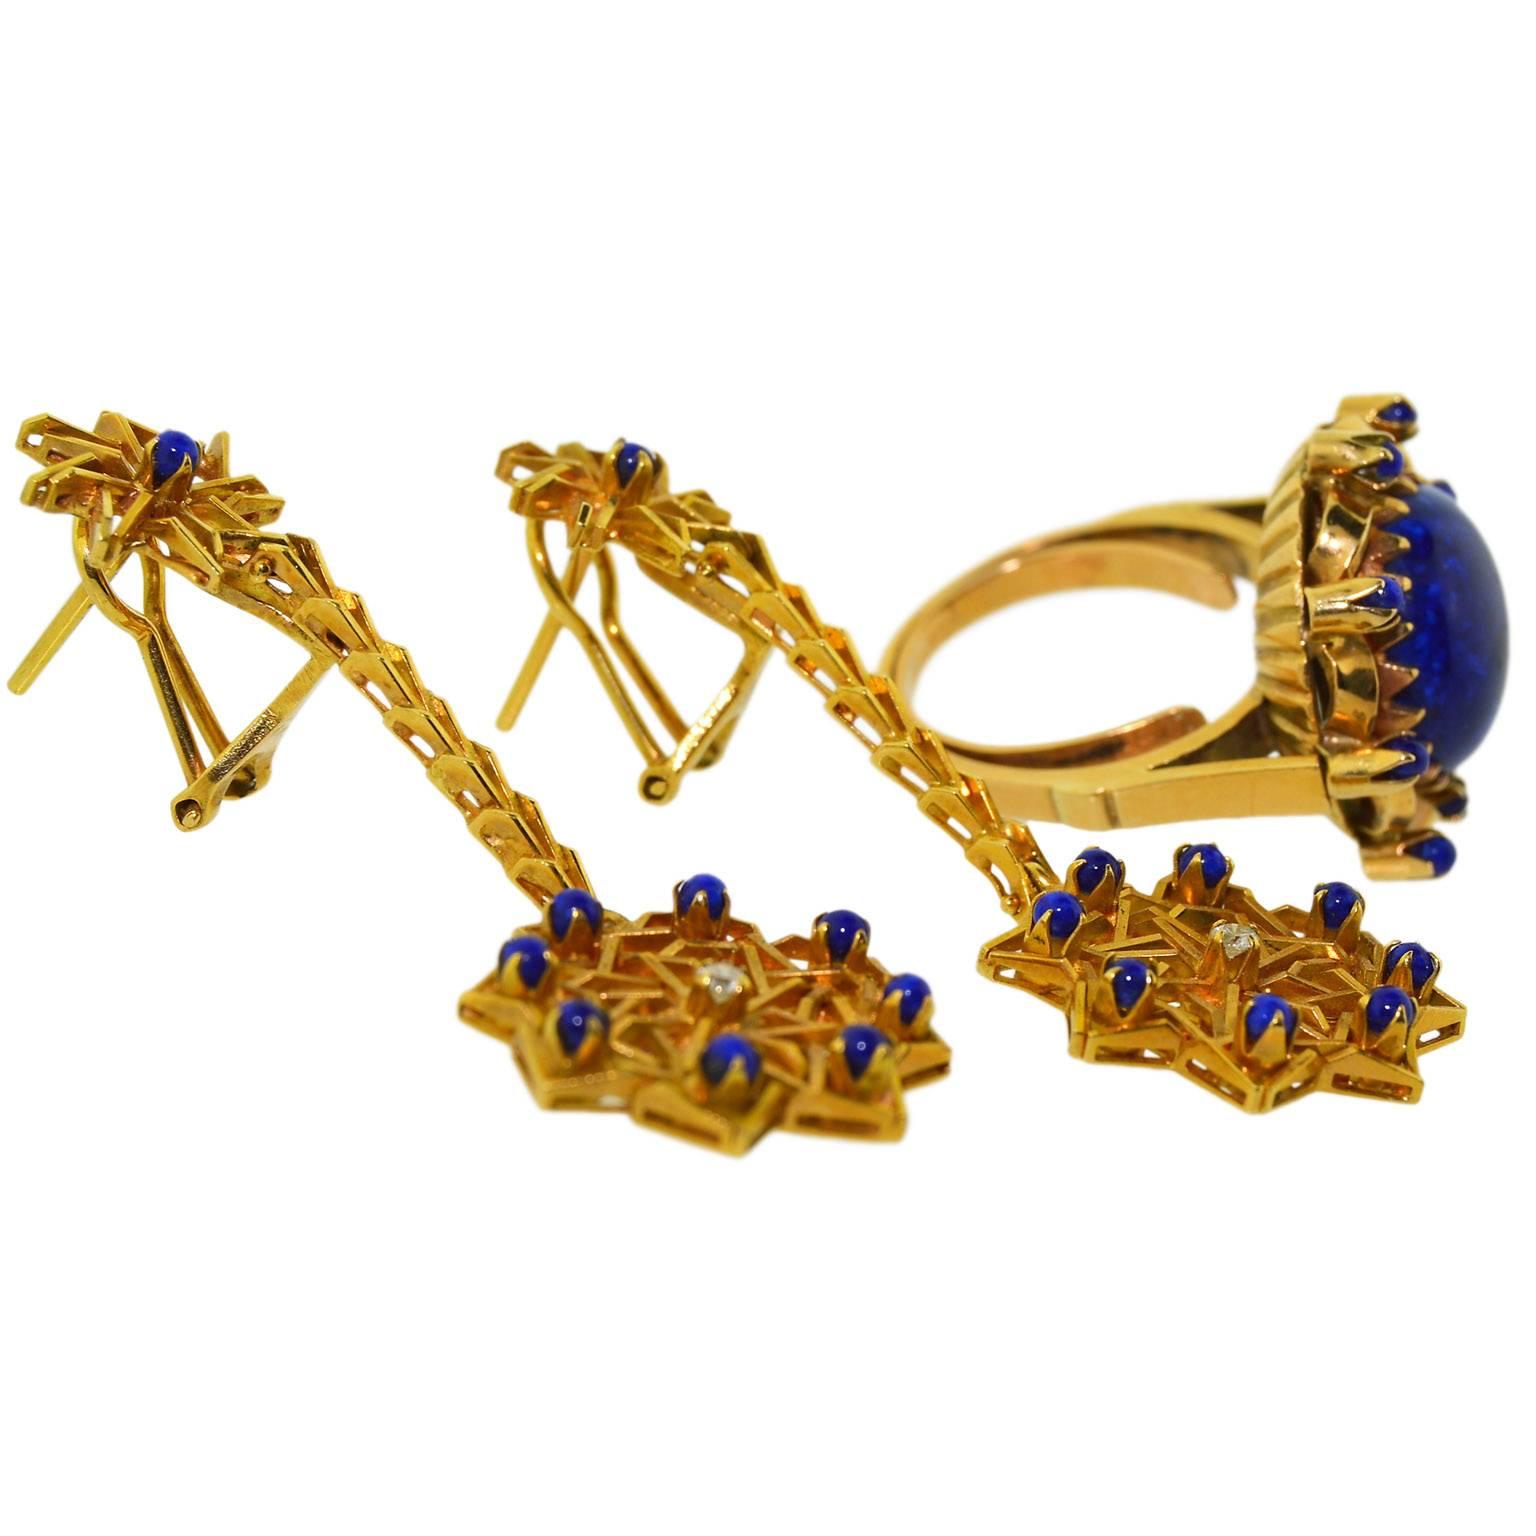 Solid, 14kt. yellow gold hand constructed 1960's earring and ring set.
18 Lapis Lazuli cabochon stones arranged in an exceptional hand constructed pair of earrings.
Additionally, one large 13mm Lapis stone set in a hand constructed ring set with 8,